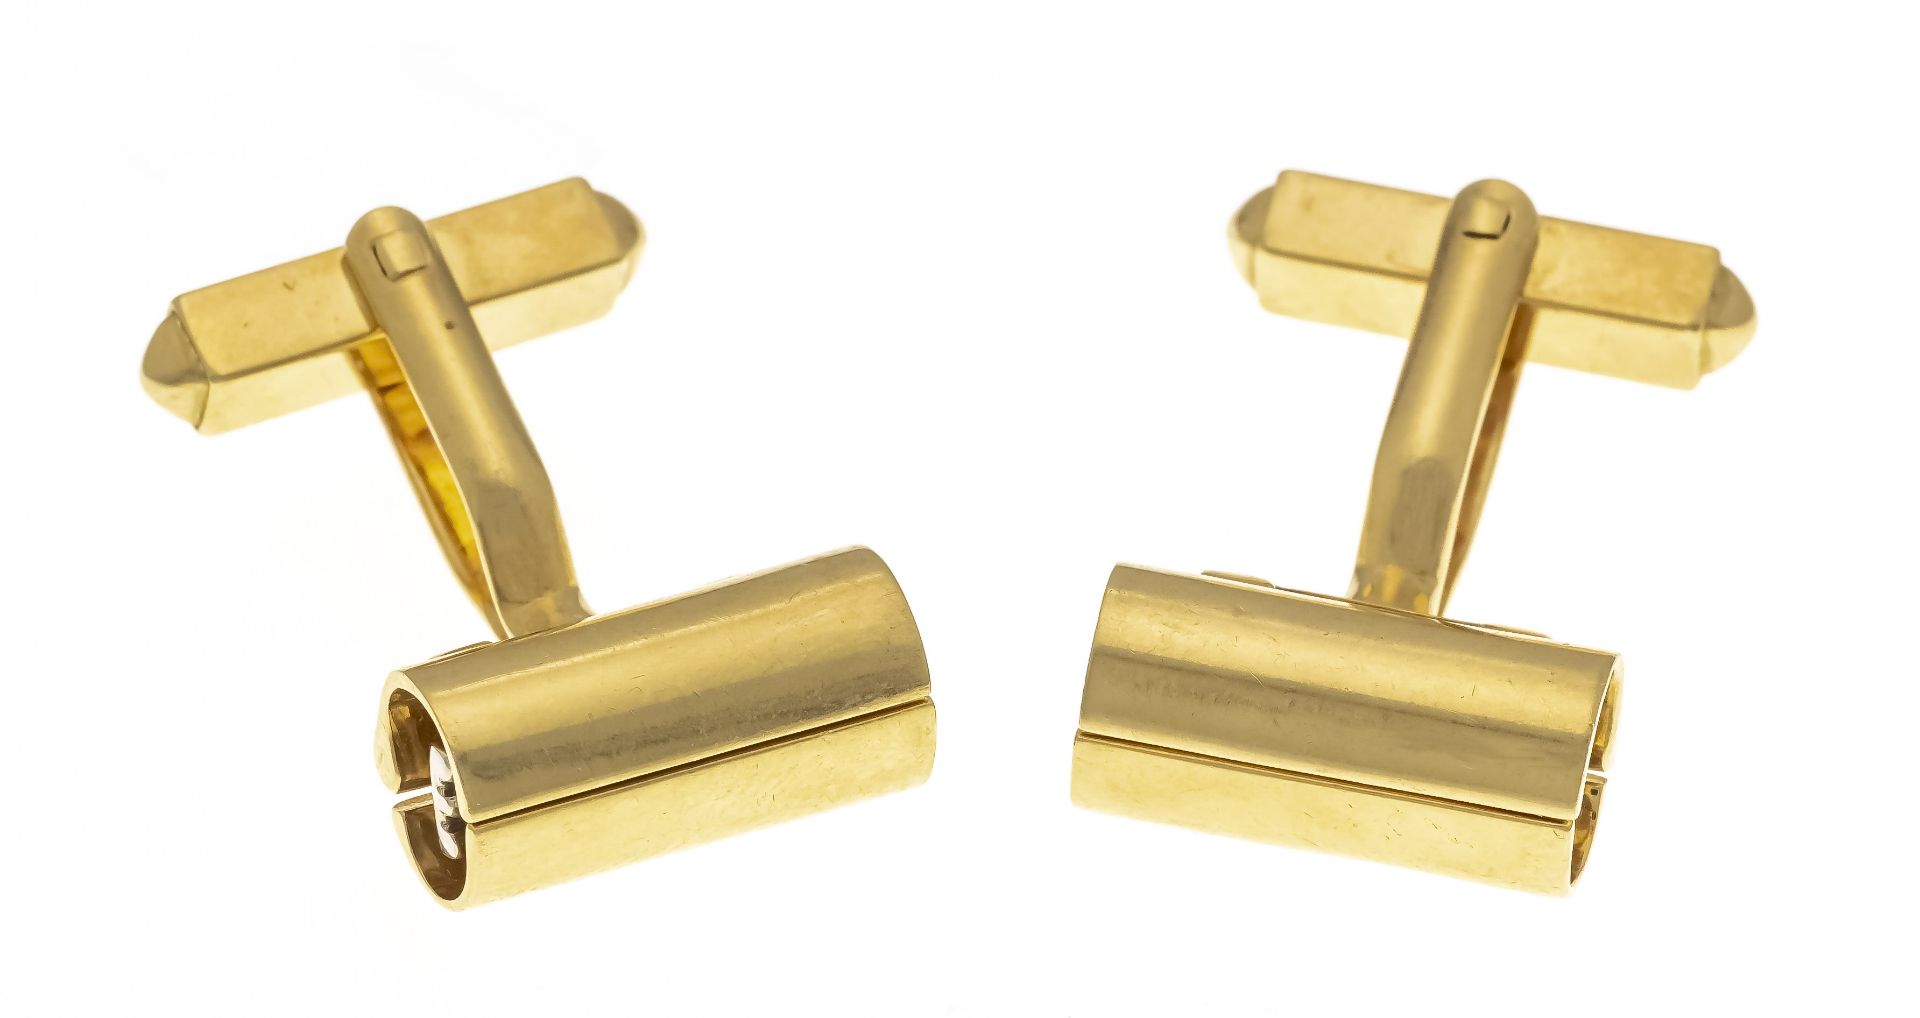 Design cufflinks GG/WG 750/000 barrel-shaped, hinged on the front with 6 brilliant-cut diamonds, - Image 2 of 2